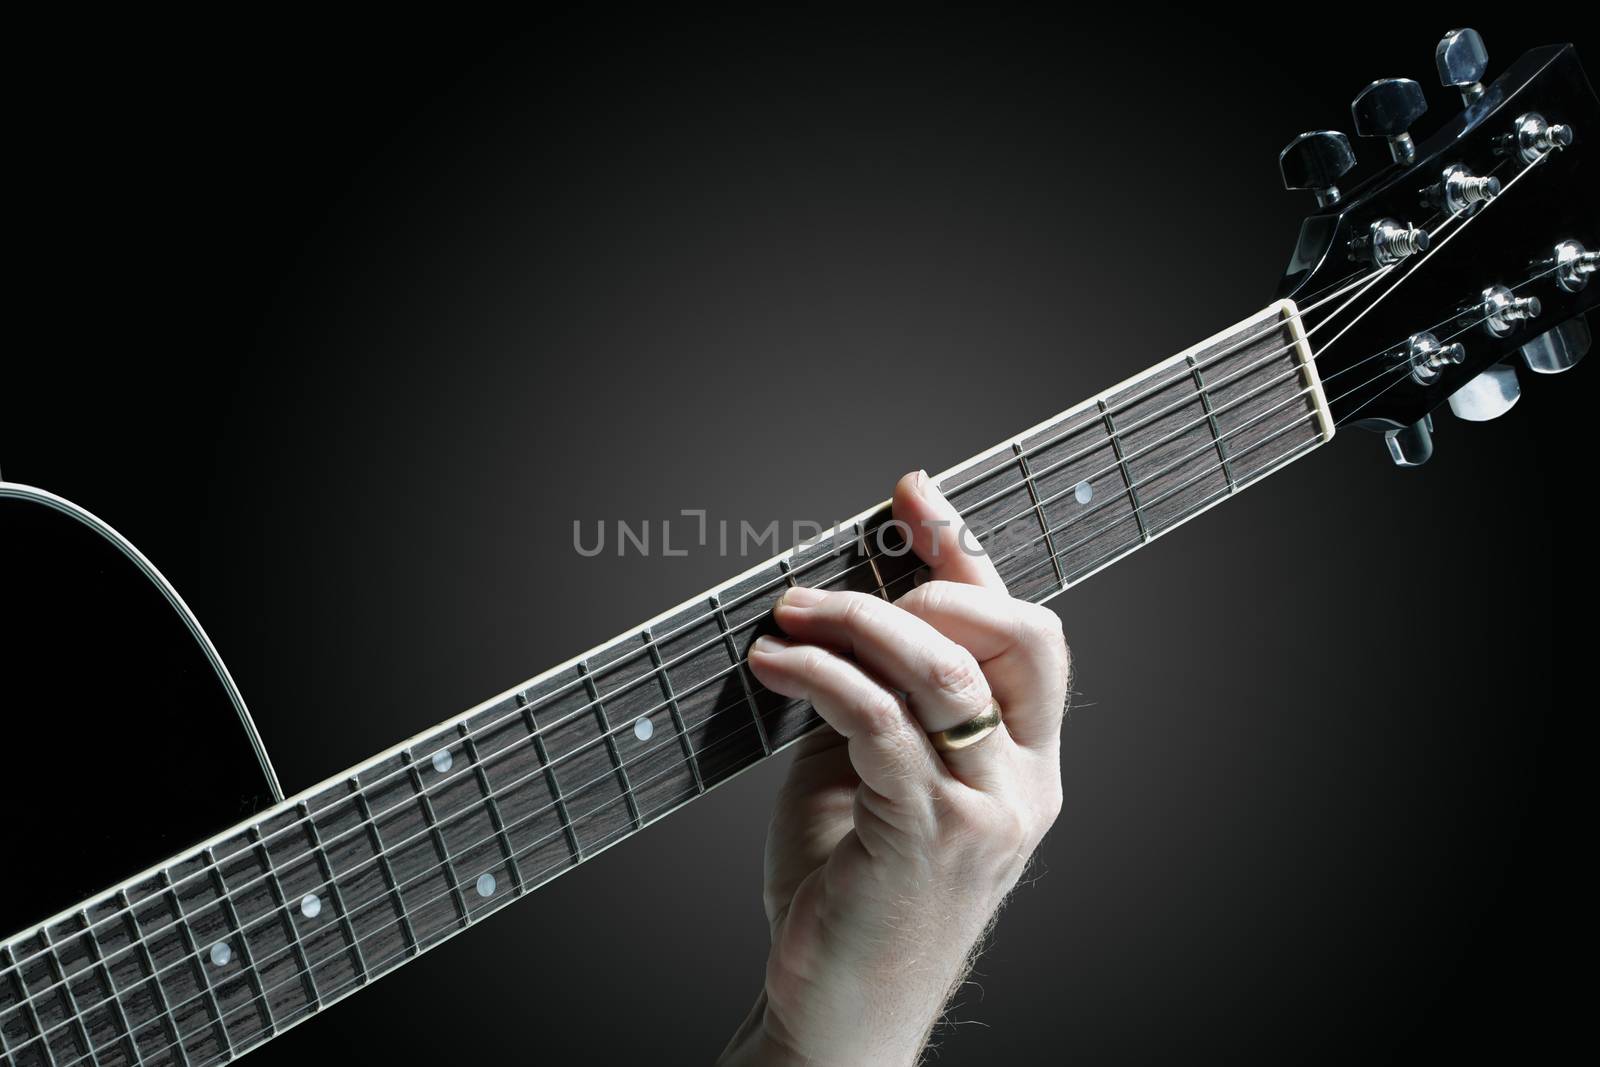 A Musician playing guitar on a dark graduated background